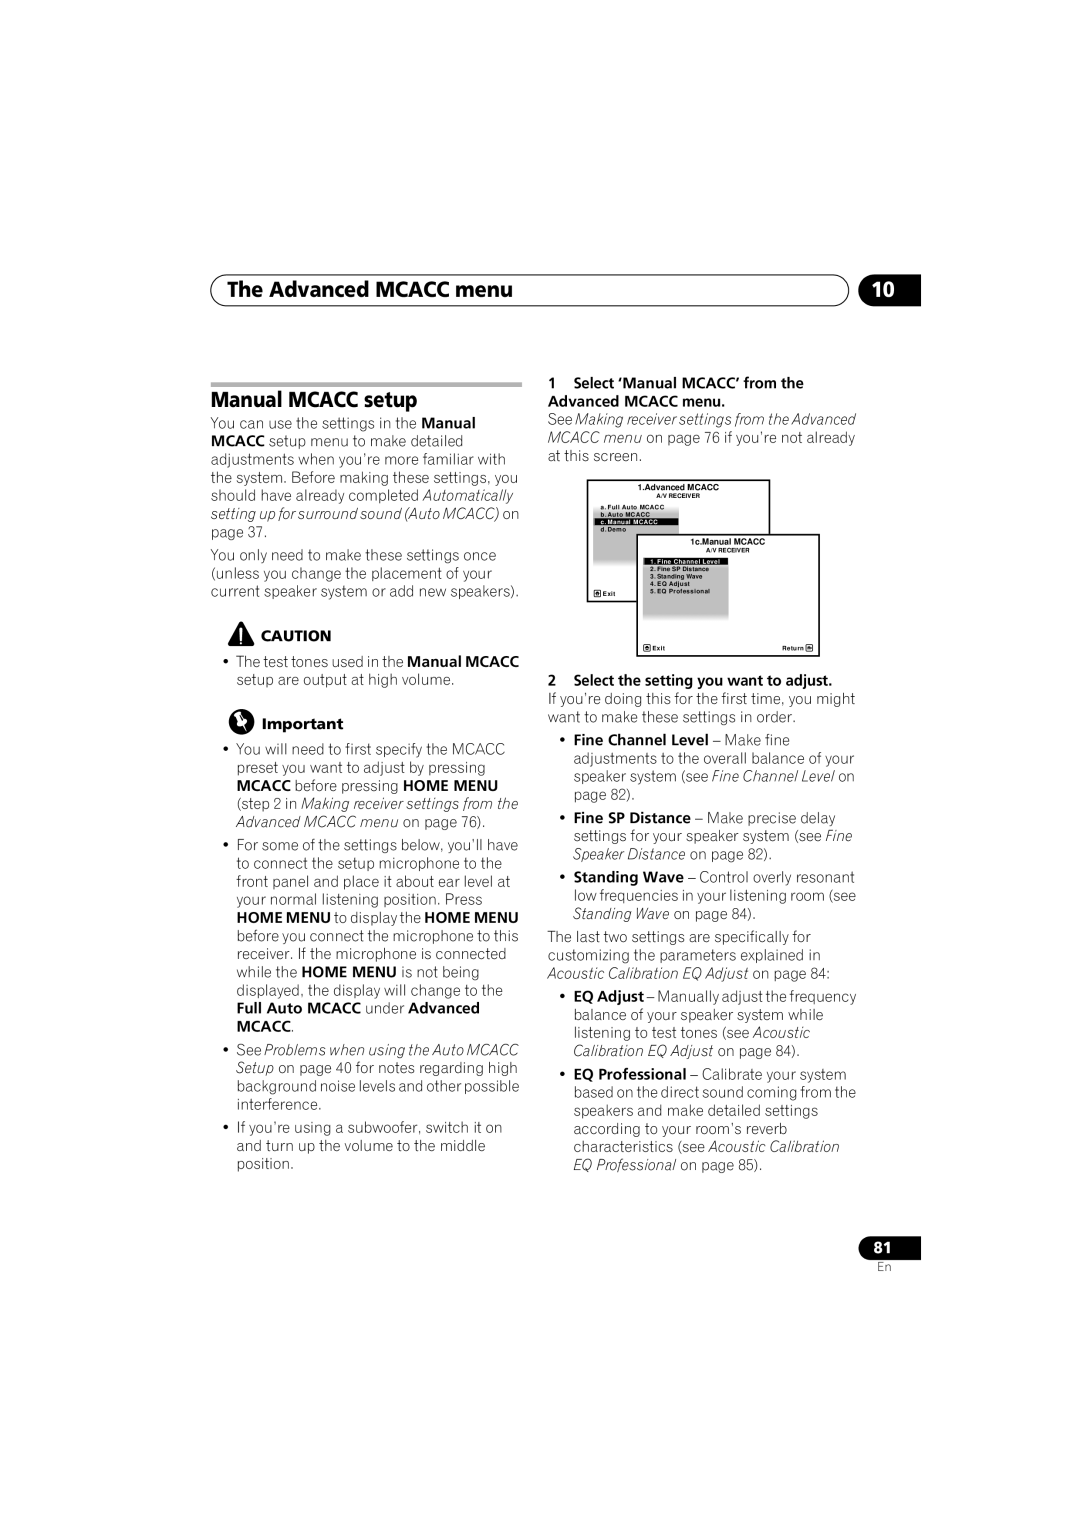 Pioneer VSX-919AH-S manual The Advanced MCACC menu Manual MCACC setup, Mcacc, Select the setting you want to adjust 